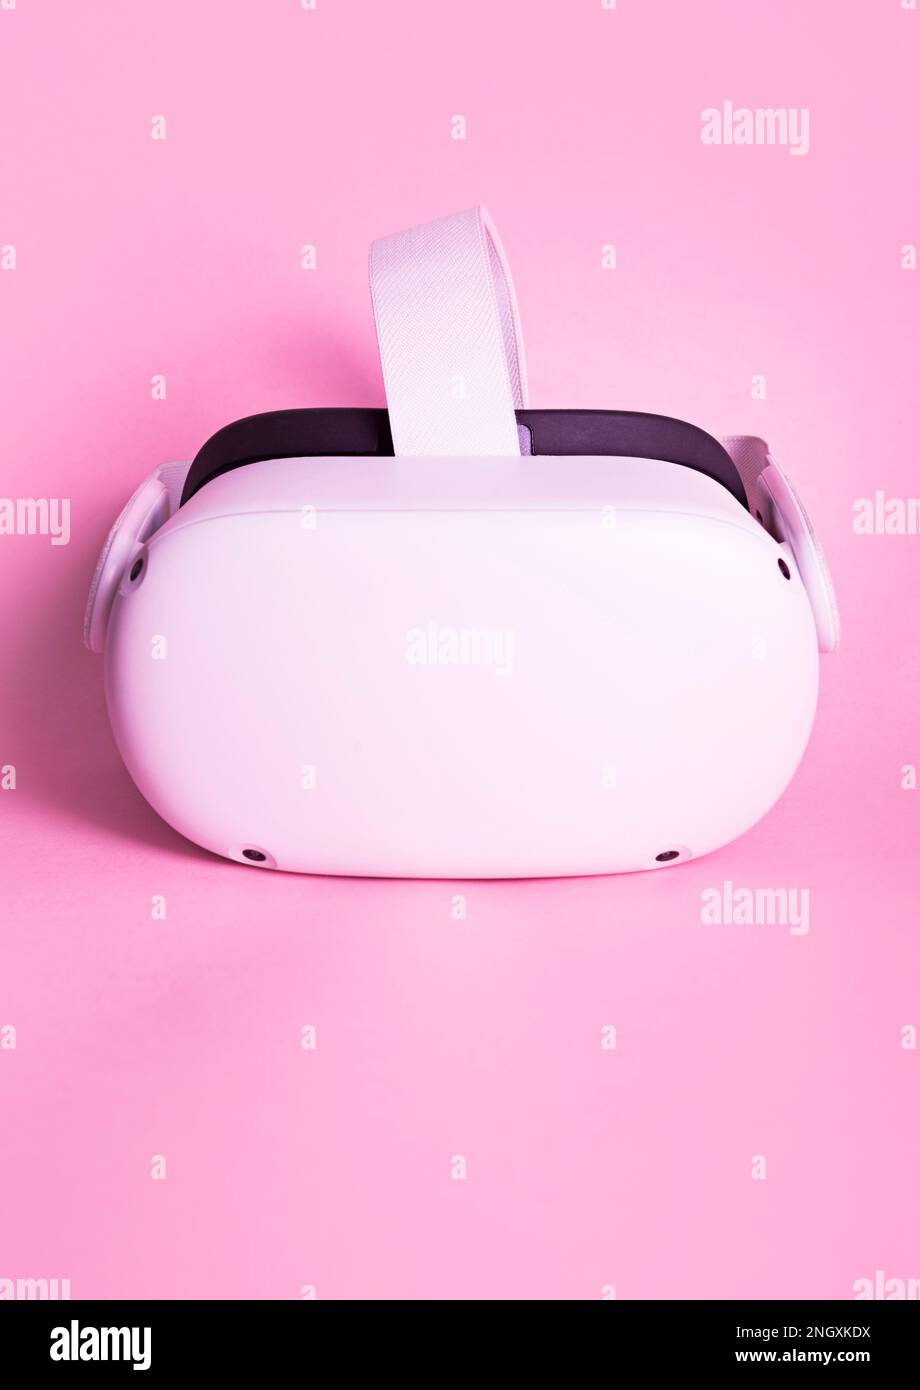 Virtual reality glasses on a pink background. Concept of innovation, women in the world of technology. Stock Photo